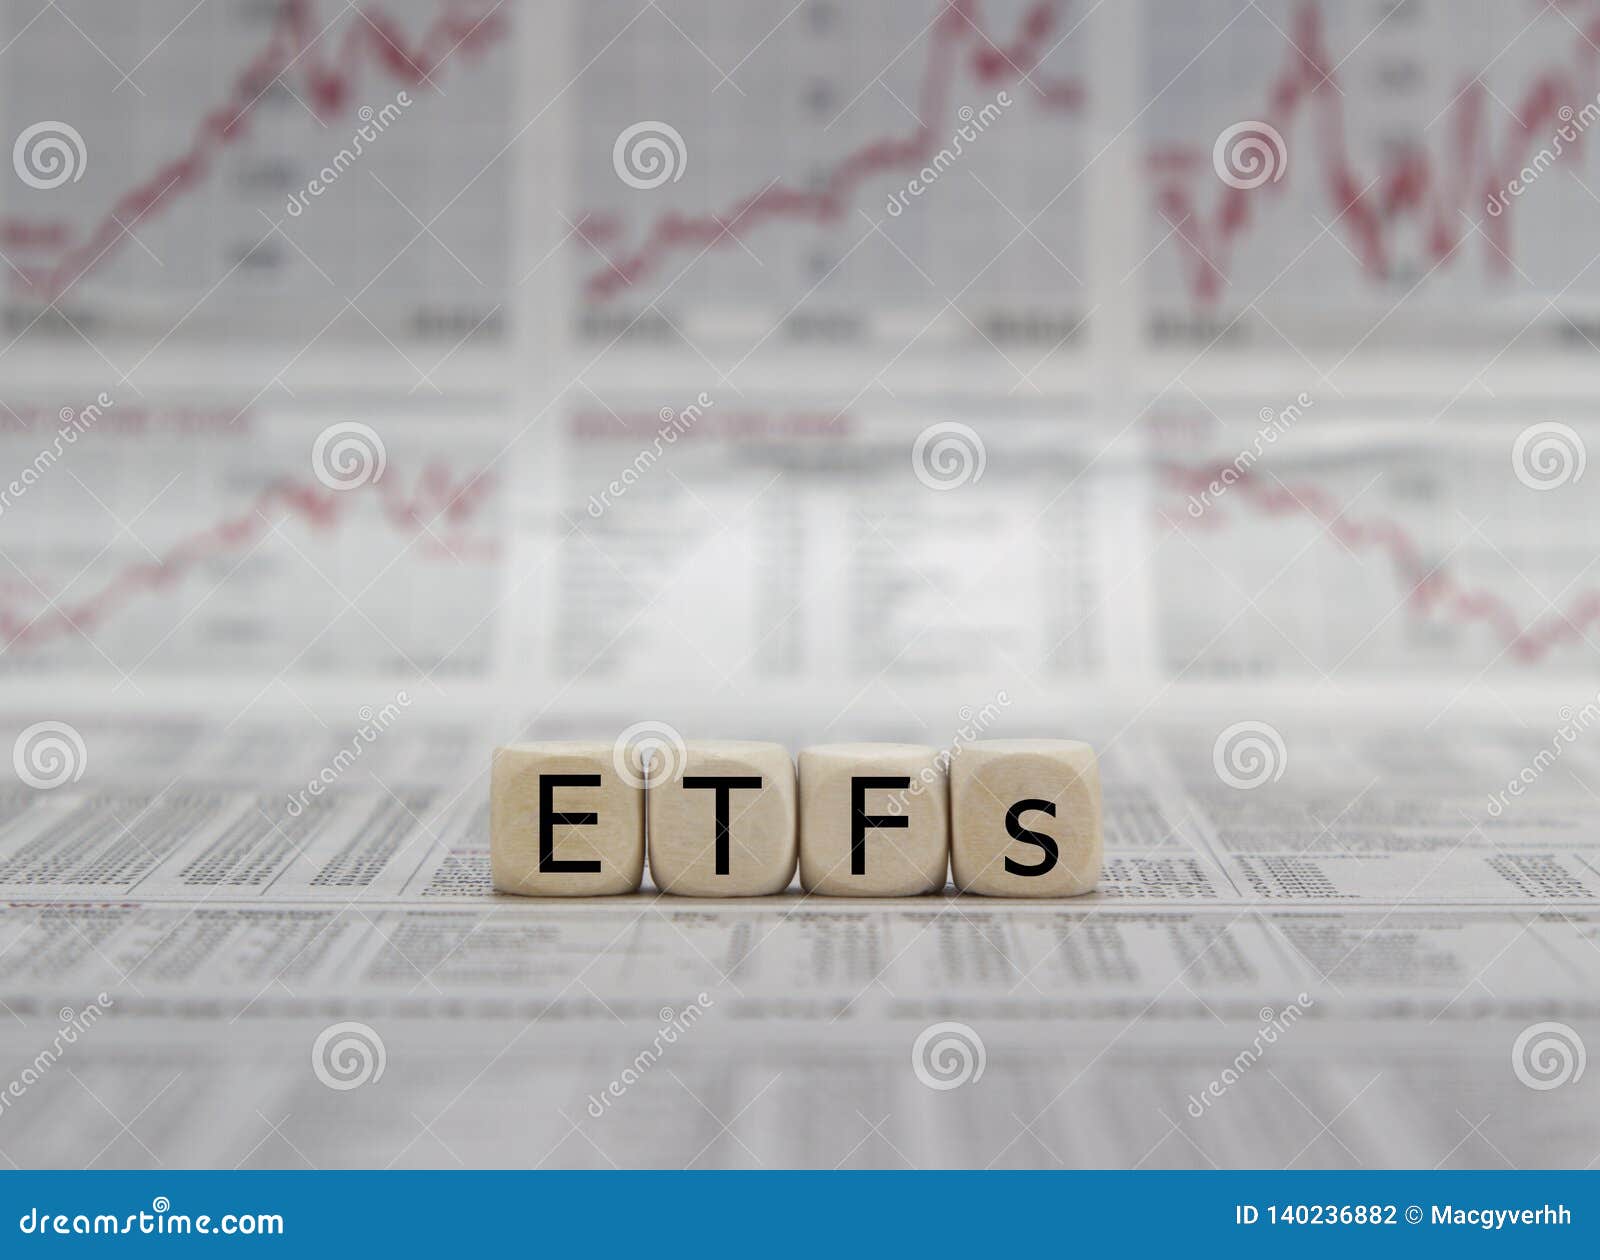 etf exchange trades funds word